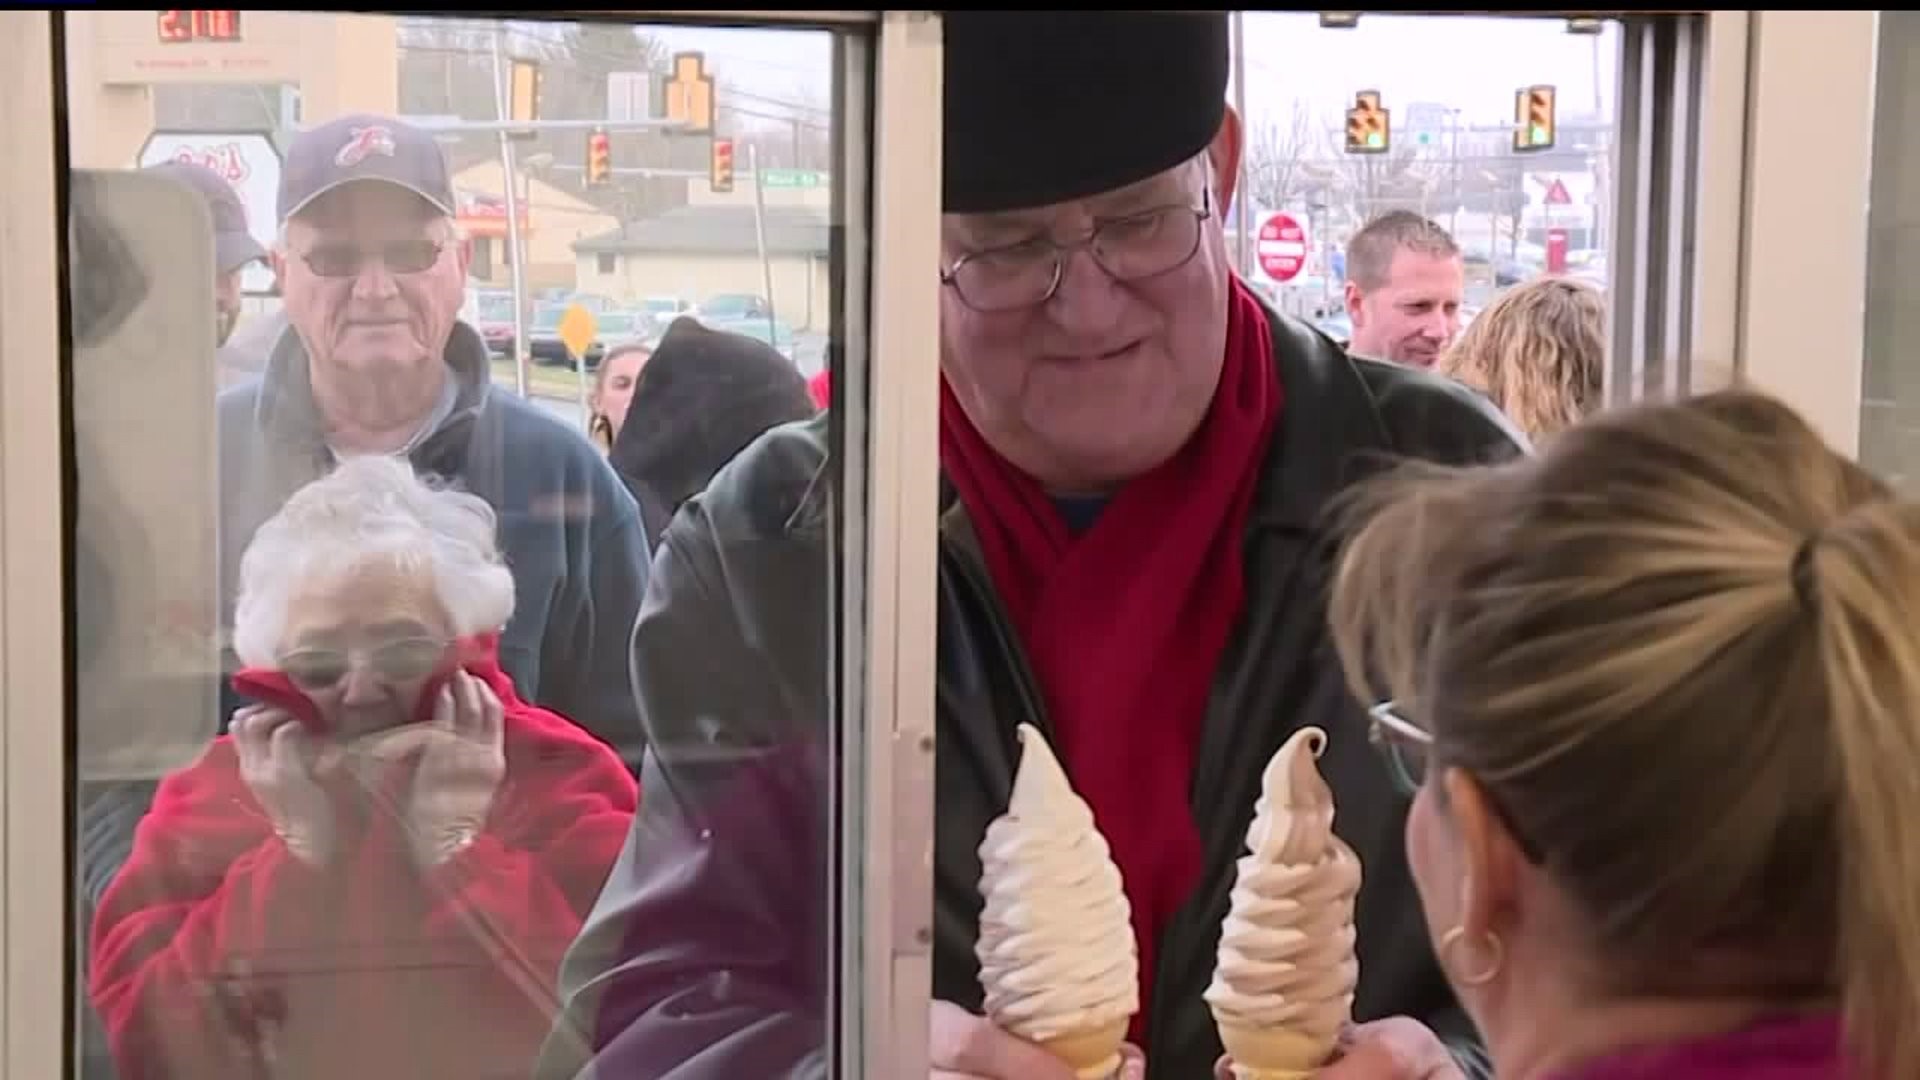 Ice cream shop opens for one day of fundraising